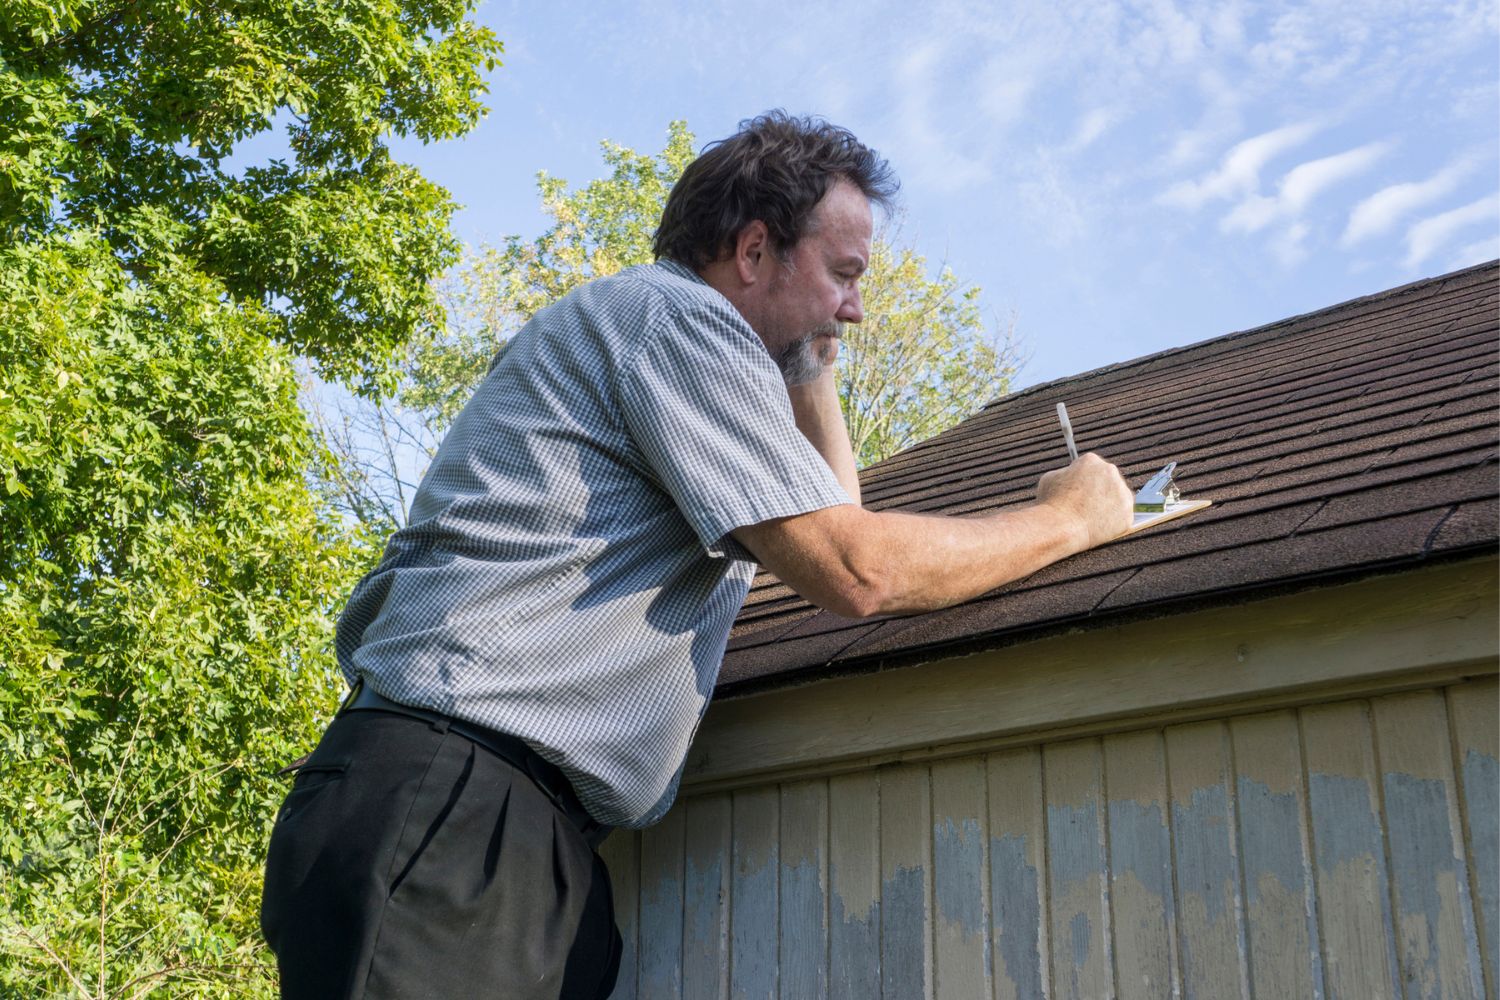 Roof Inspection Cost